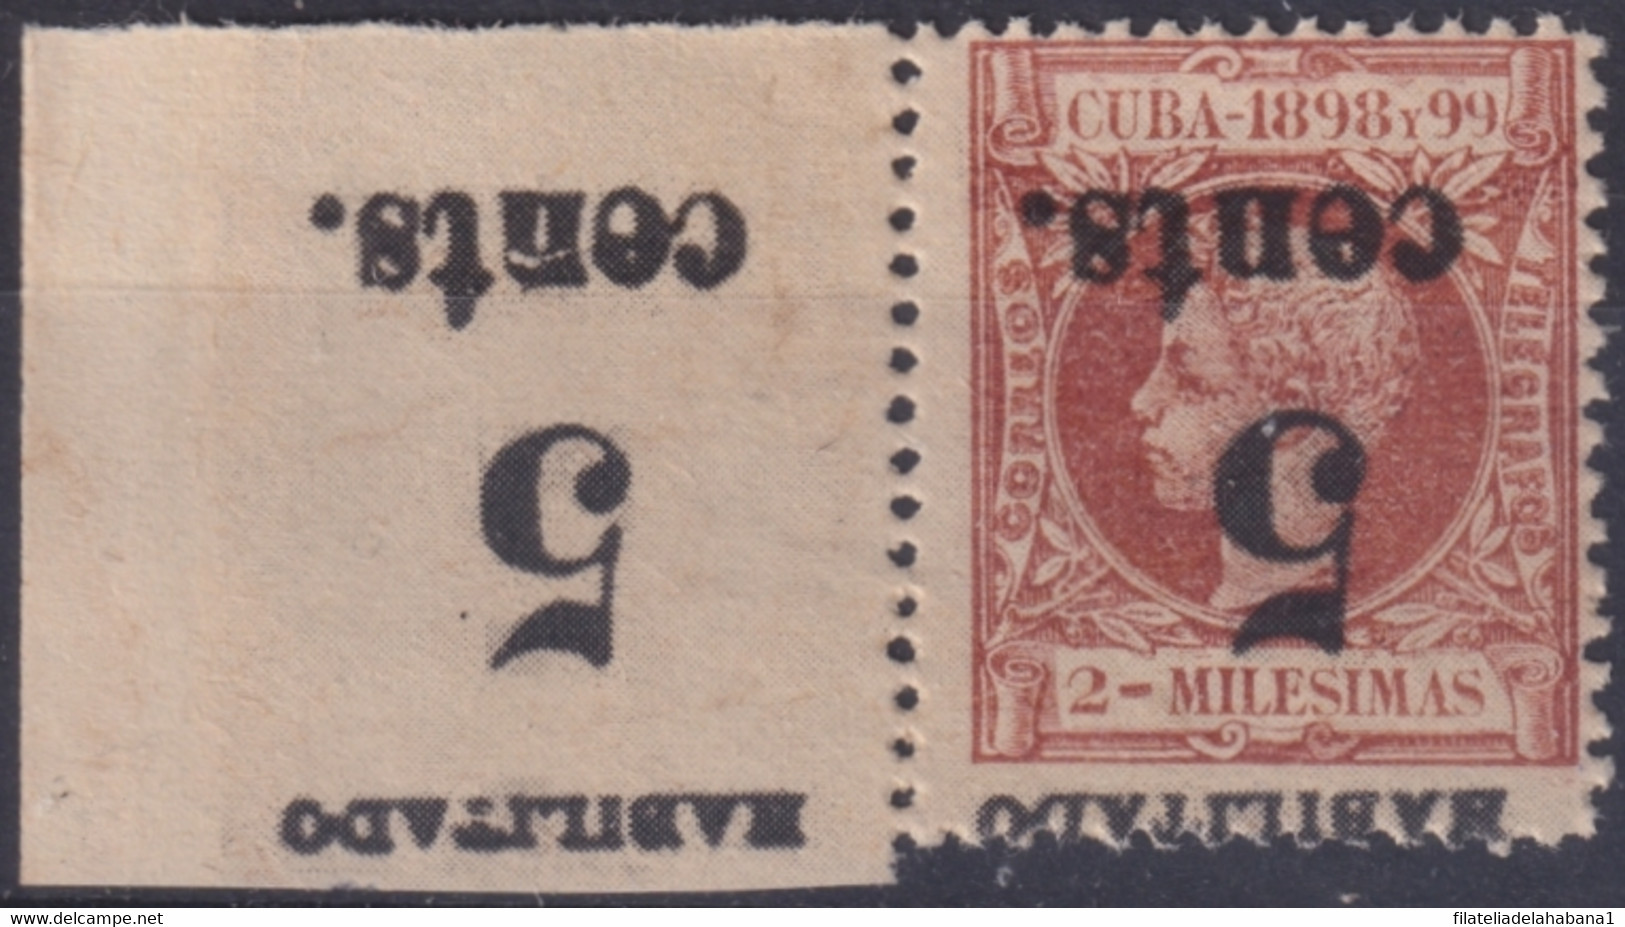 1899-484 CUBA 1899 5c S. 2m US OCCUPATION 2th ISSUE INVERTED PHILATELIC FORGERY. - Nuevos